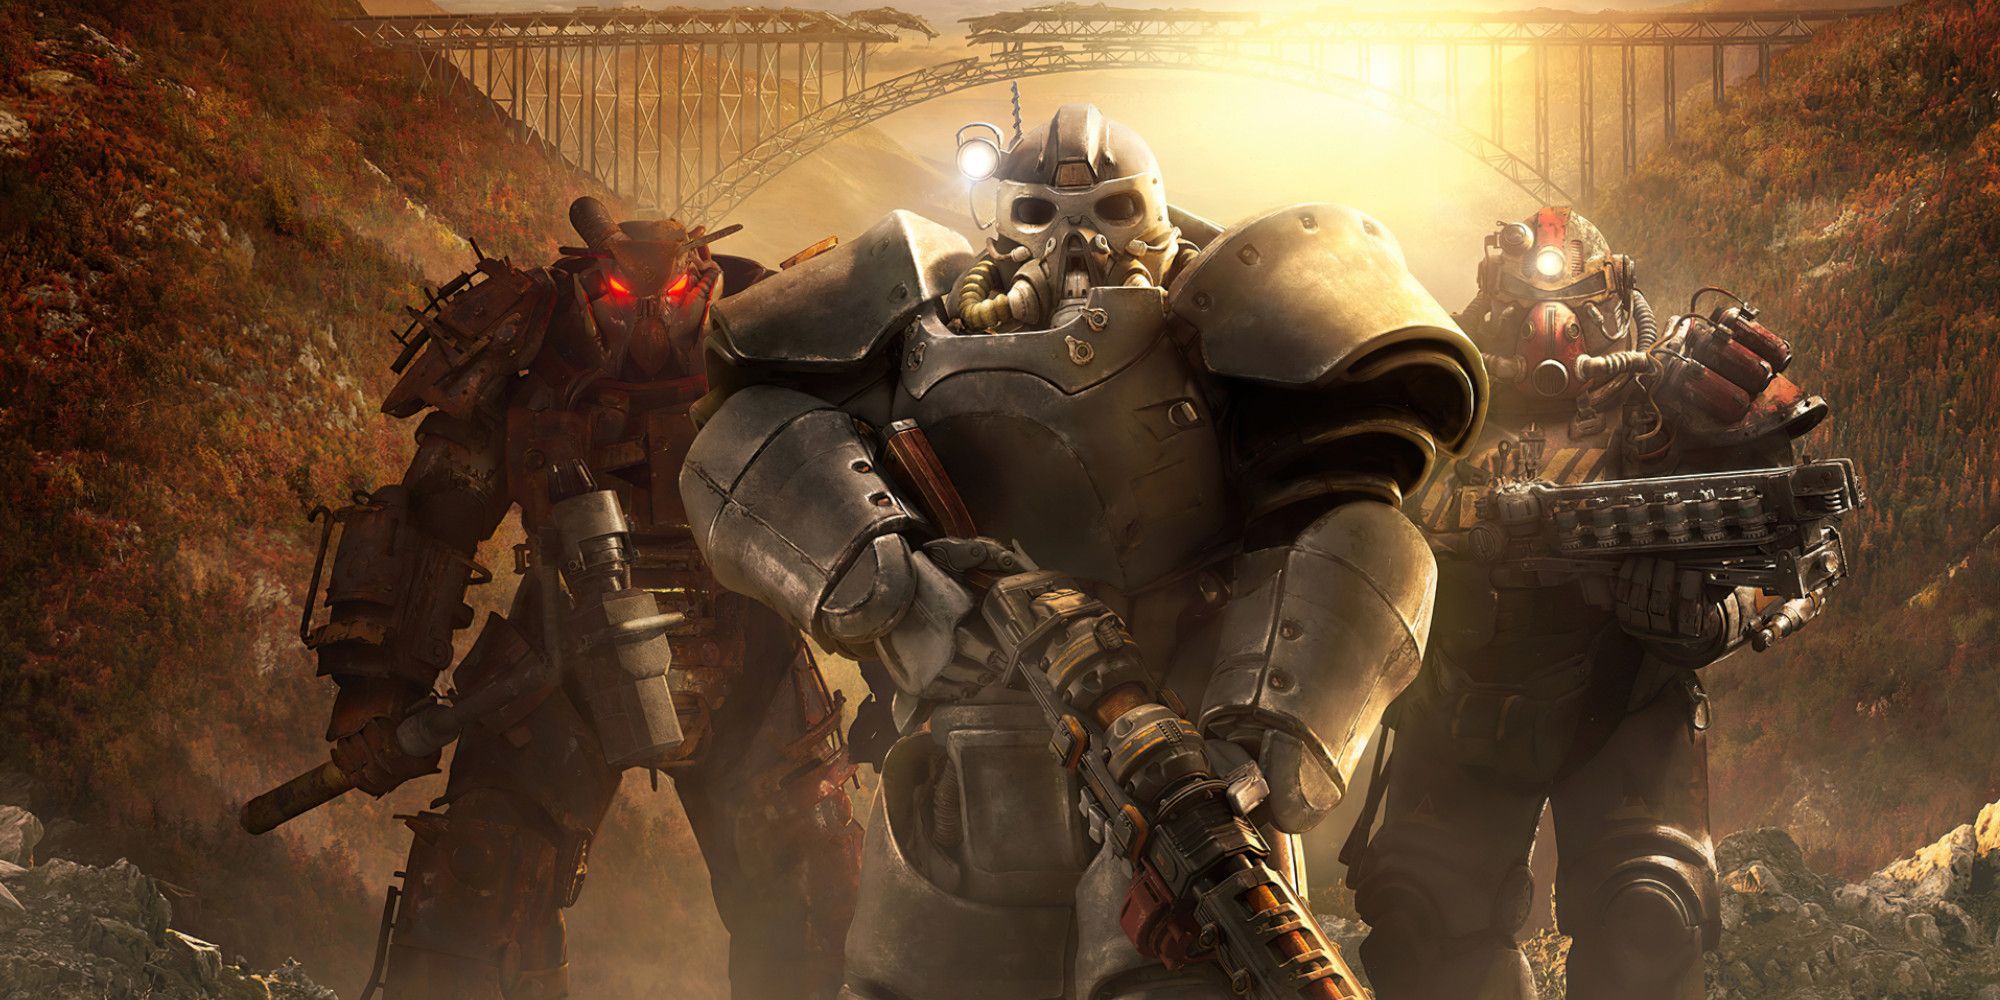 Three players in heavy Fallout armor standing in front of a sunset